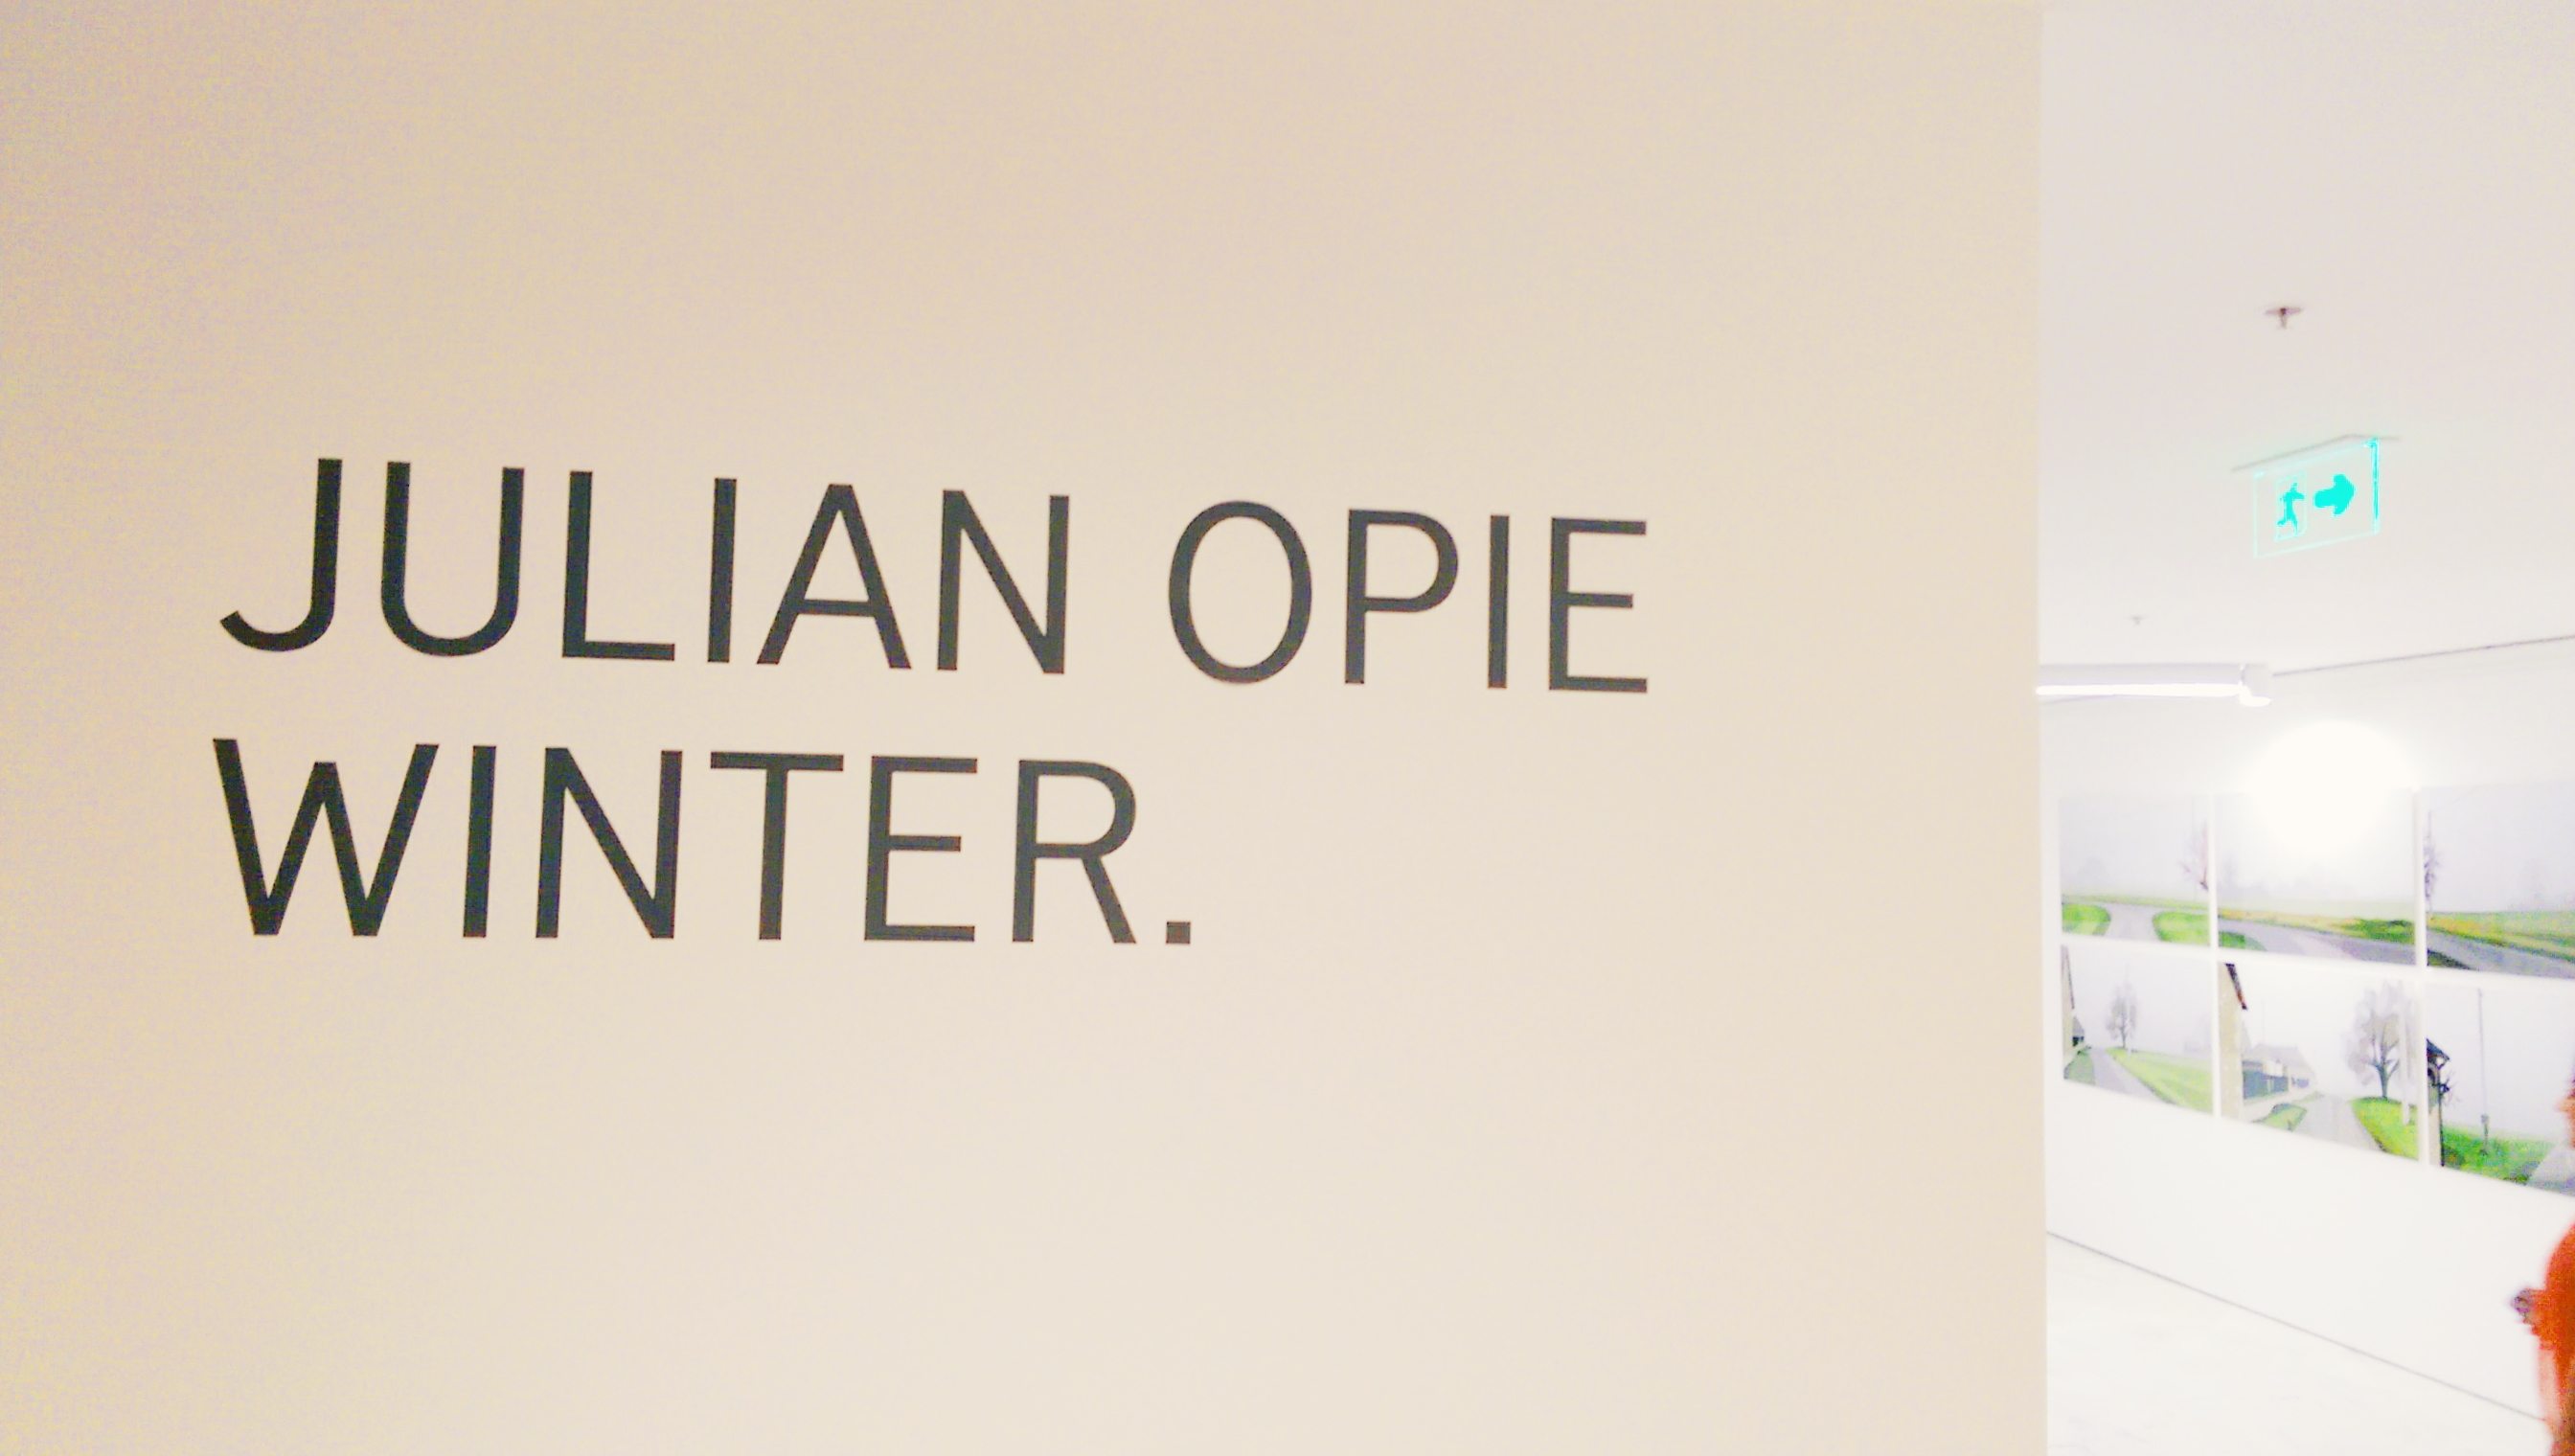 Julian Opie Exhibition, British Council India, Food by CAARA, Naina.co Luxury & Lifestyle, Photographer Storyteller, Blogger. 